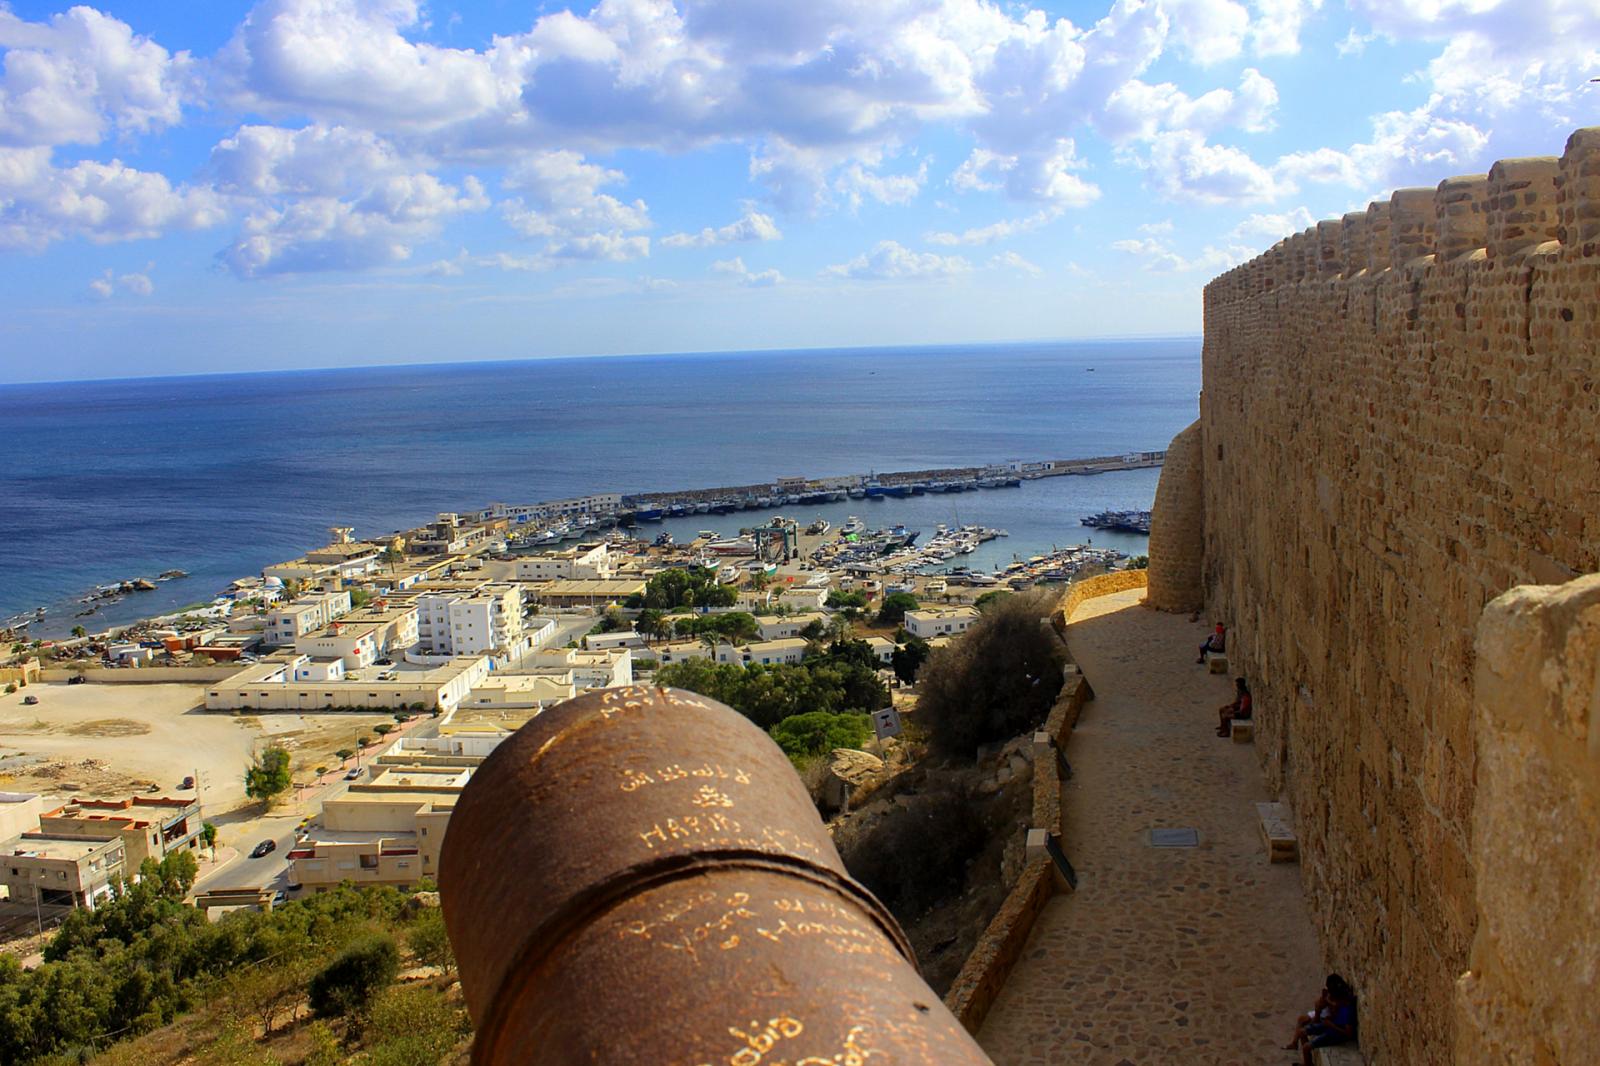 The port of Kelibia as seen from the town’s byzantine fortress. (Credit: Sami Mlouhi (CC BY-SA 2.0))